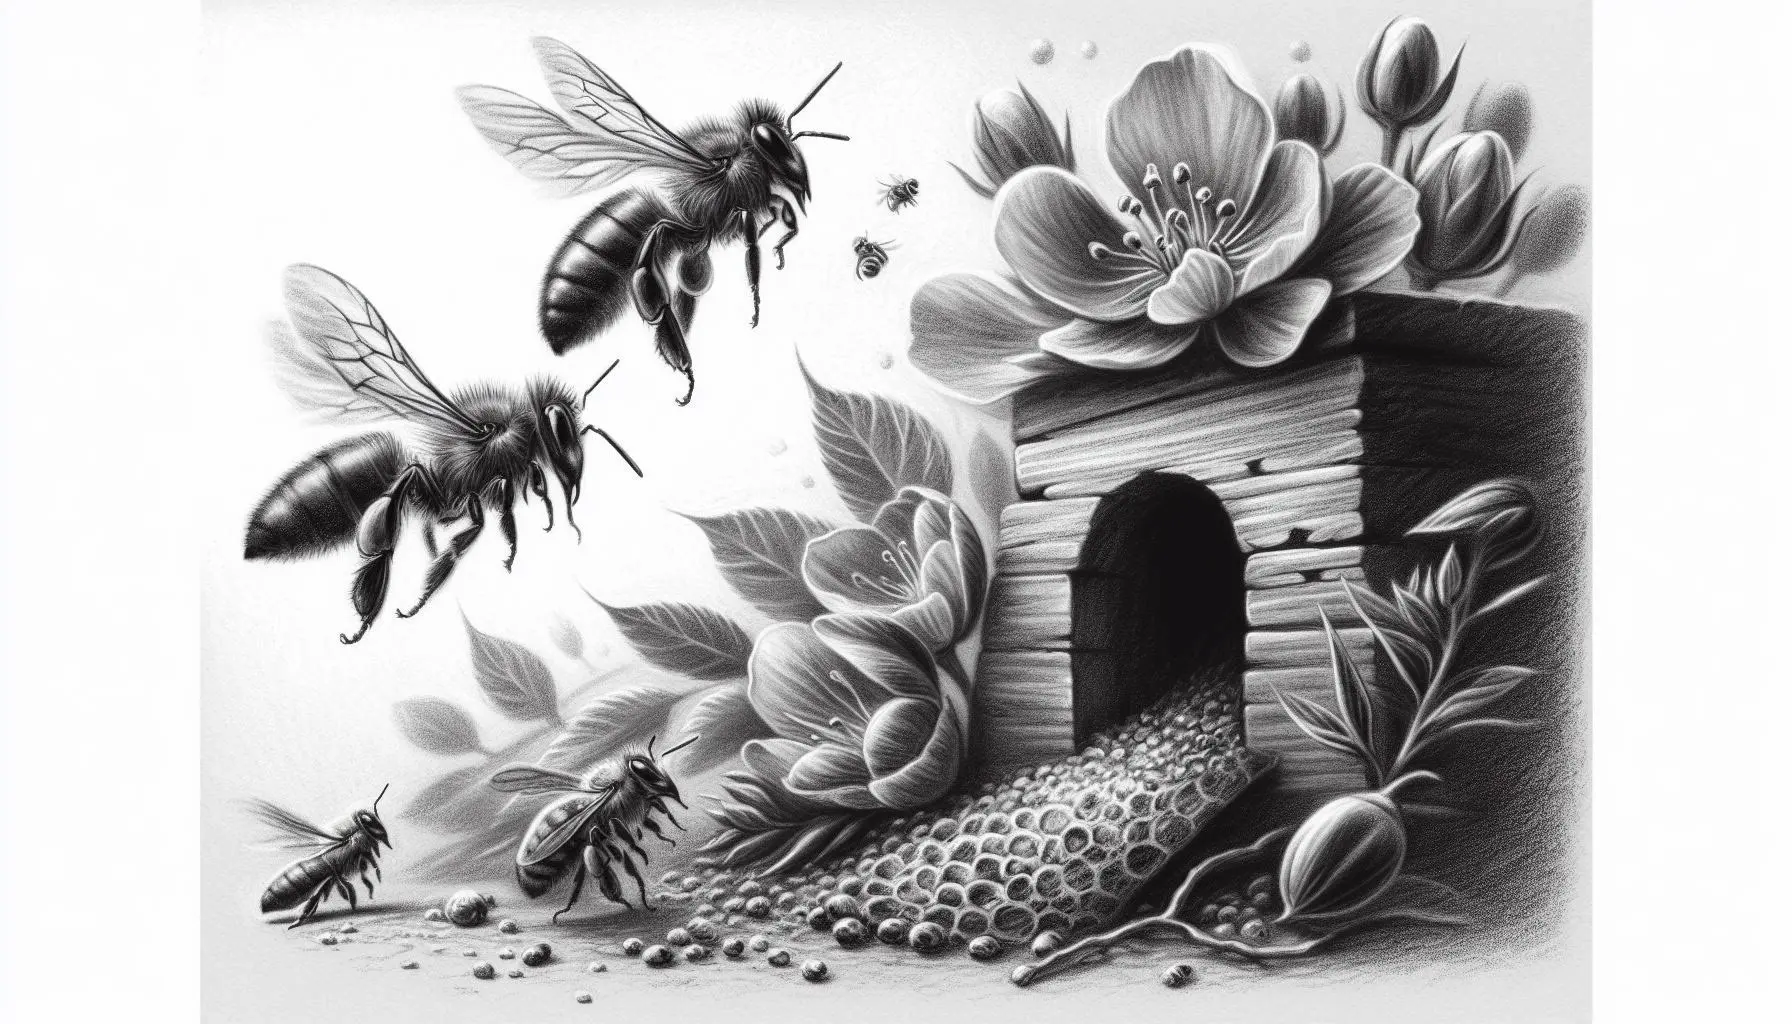 AI image of bees returning to a hive with flowers on it in charcoal style.